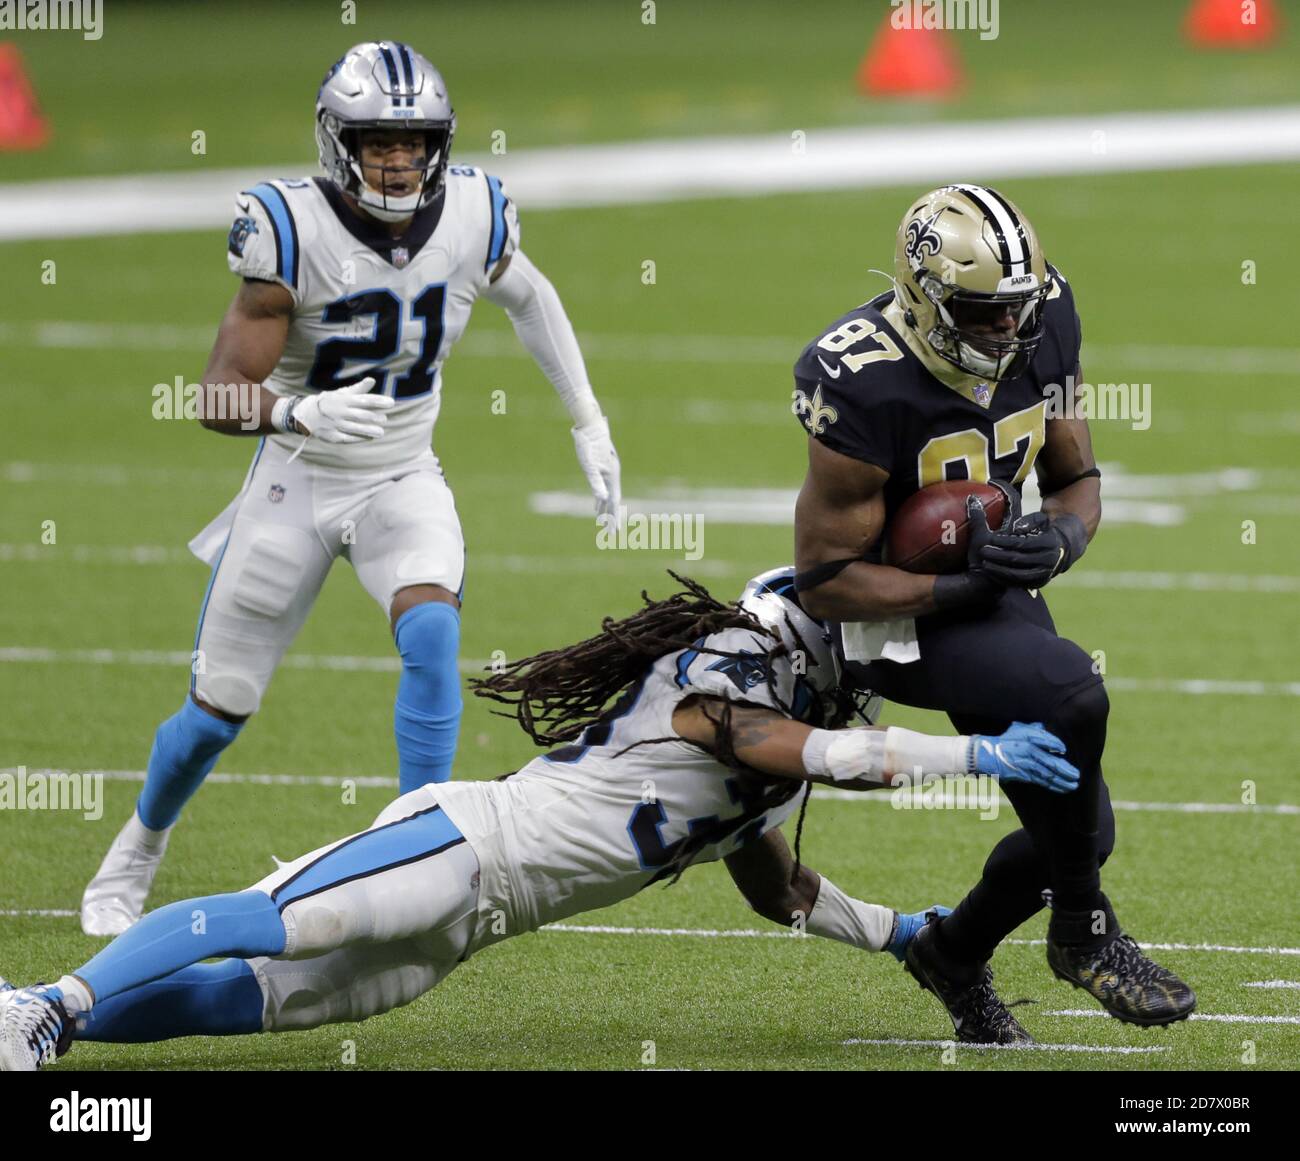 New Orleans, United States. 25th Oct, 2020. New Orleans Saints tight end Jared Cook (87) escapes from Carolina Panthers defenders Tre Boston (33) and Jeremy Chinn (21) at the Louisiana Superdome in New Orleans on Monday, October 25, 2020. Photo by AJ Sisco/UPI. Credit: UPI/Alamy Live News Stock Photo